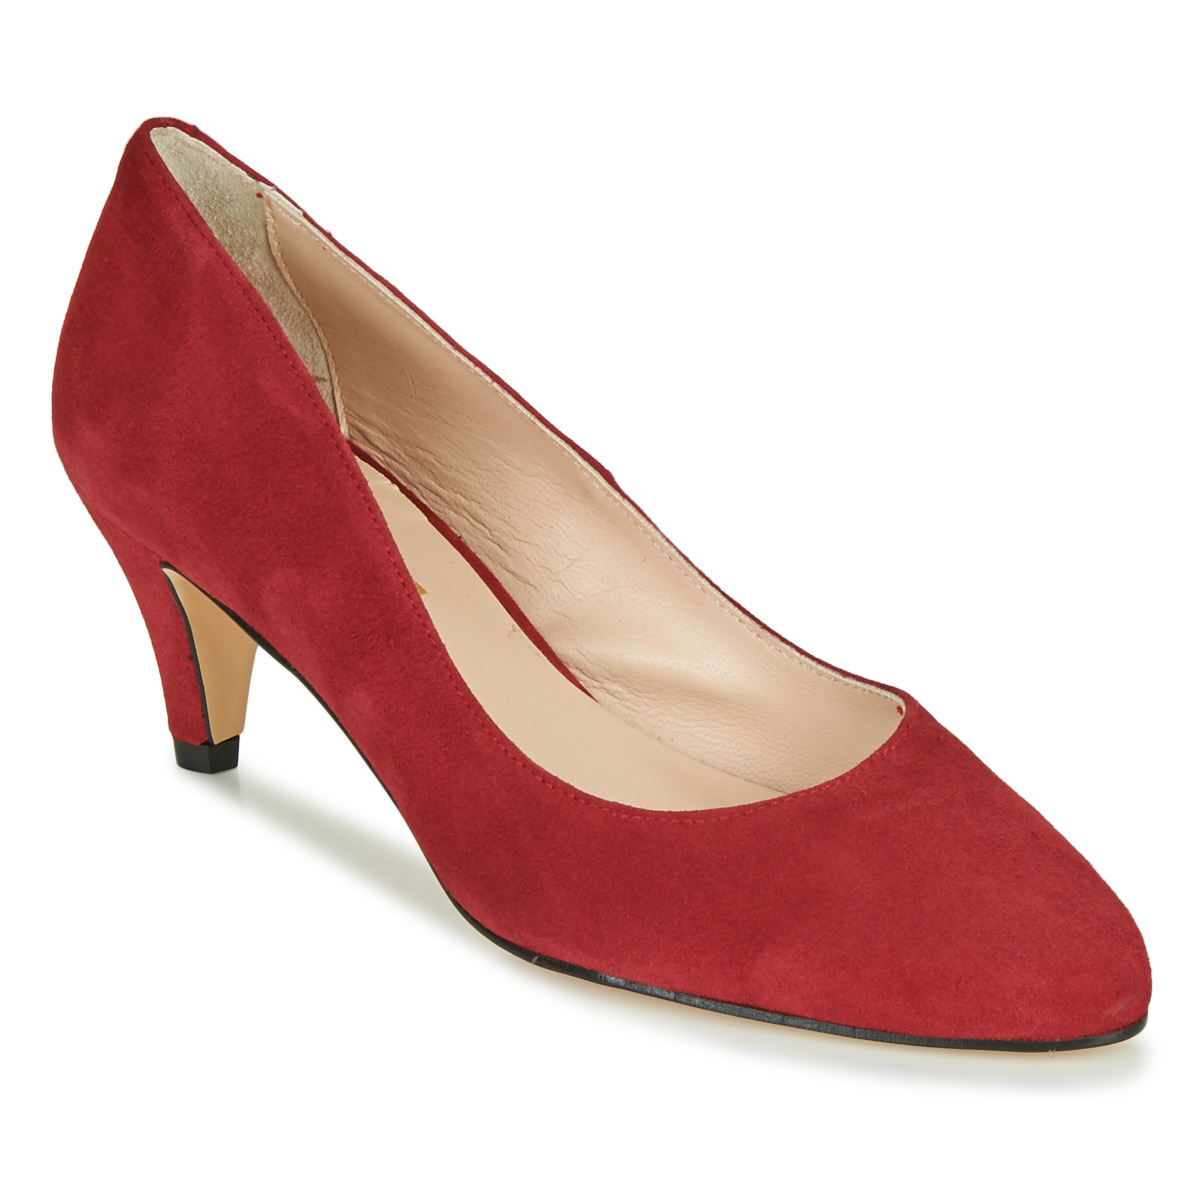 Betty London - Lady Pumps in Red - Spartoo GOOFASH